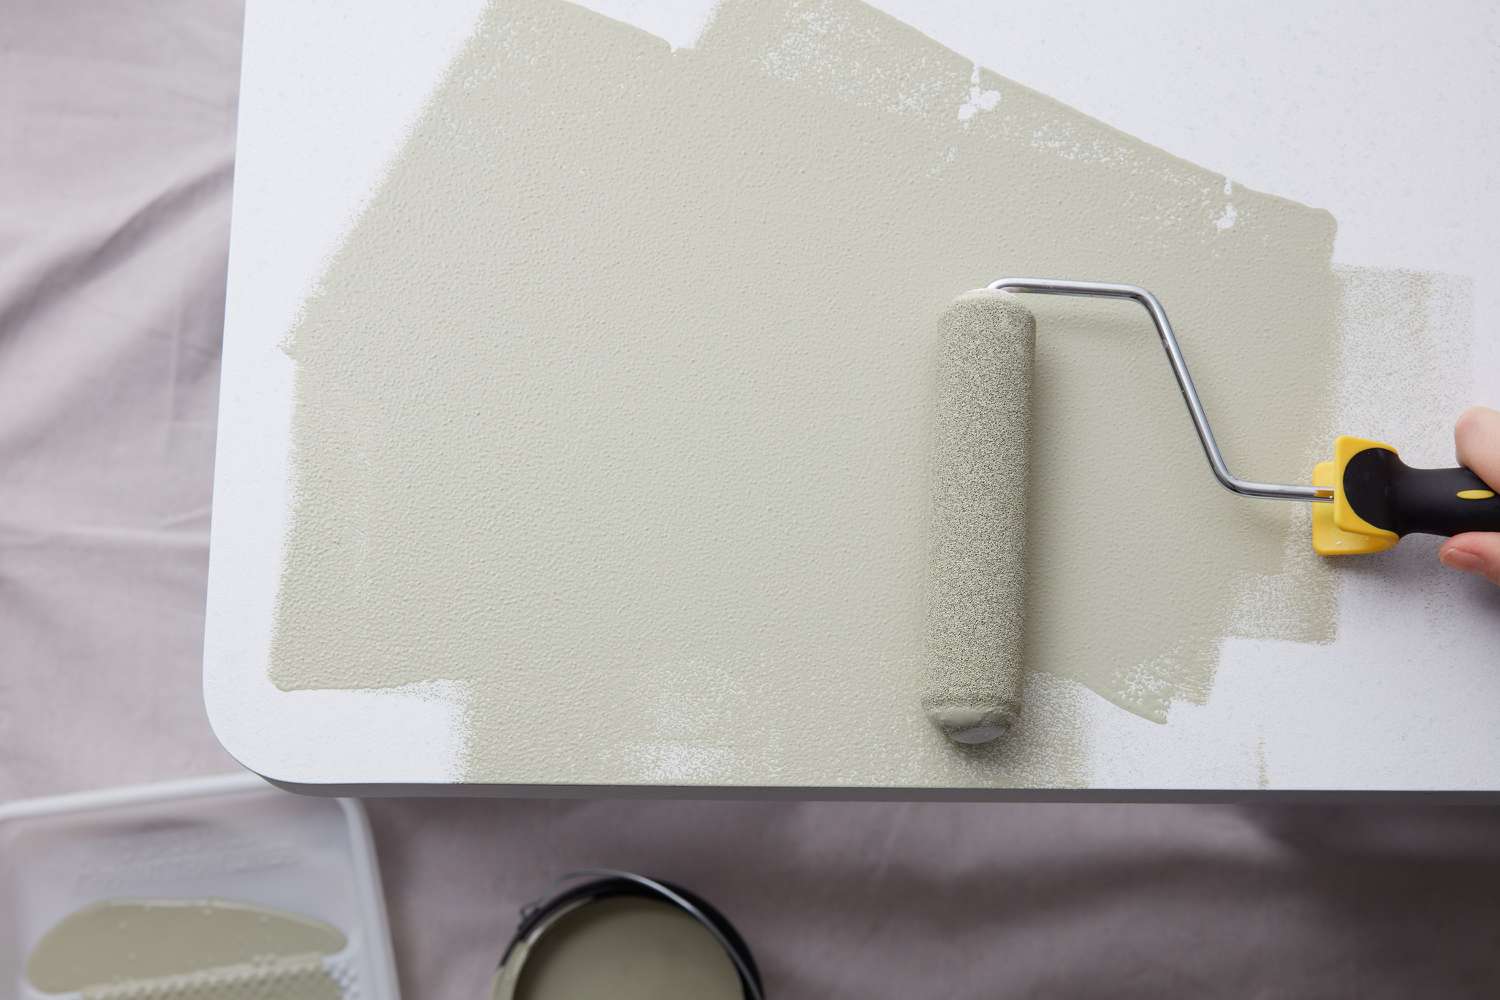 Cream paint on paint roller going over laminate surface